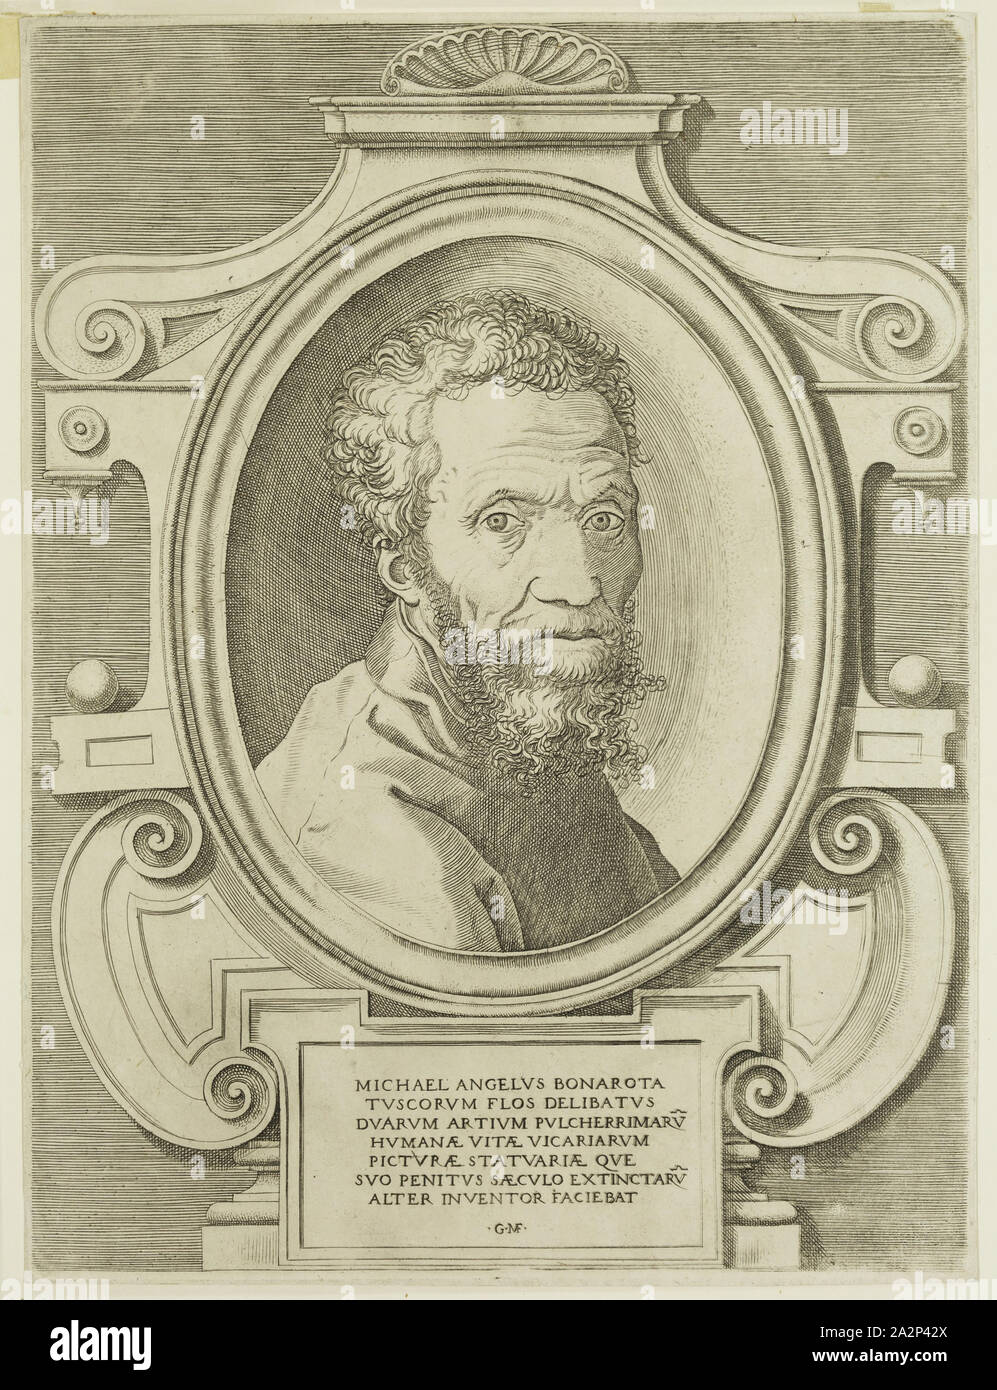 Giorgio Ghisi, Italian, 1520-1582, after Marcello Venusti, Italian, 1512-1579, Michelangelo, ca. 1565, engraving printed in black ink on laid paper, Plate: 10 1/2 × 7 3/4 inches (26.7 × 19.7 cm Stock Photo